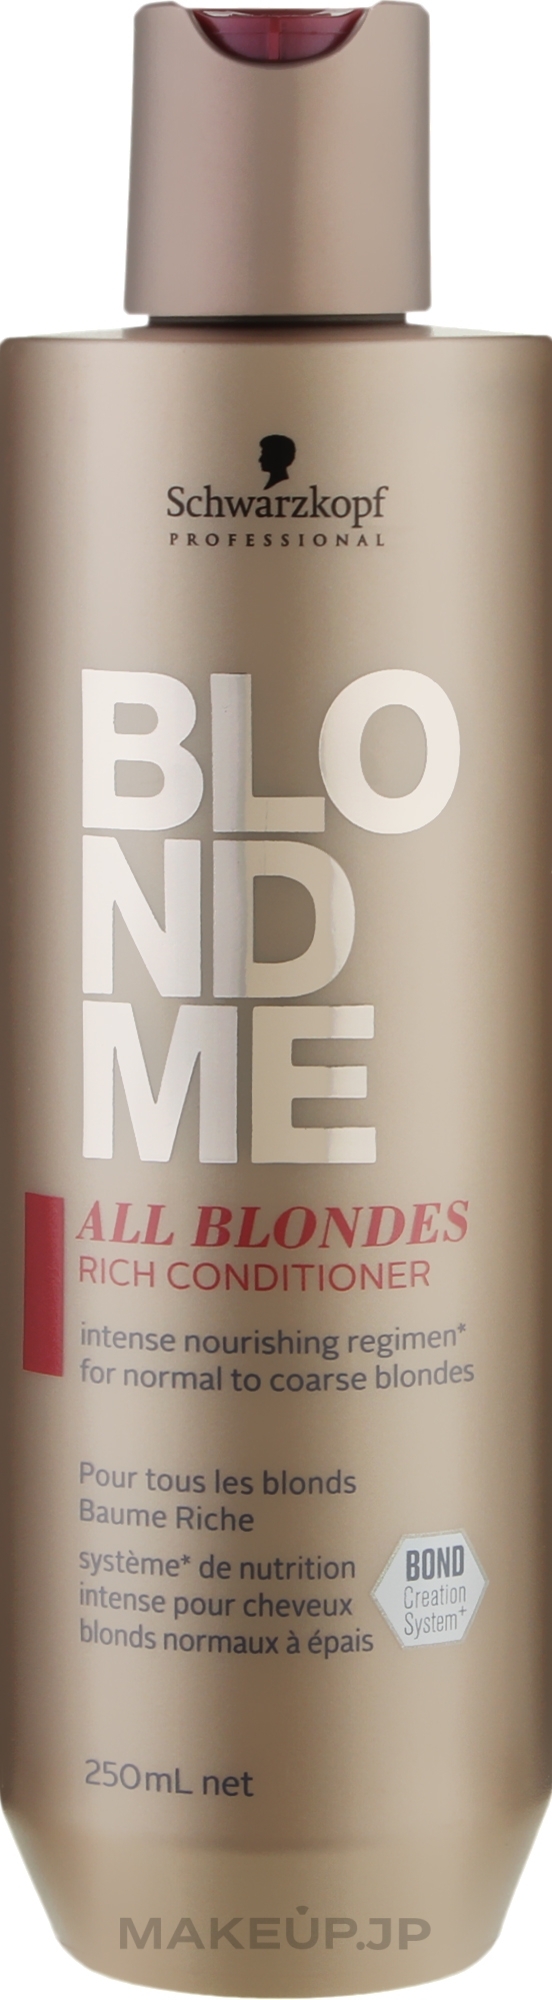 Rich Conditioner for All Hair Types - Schwarzkopf Professional Blondme All Blondes Rich Conditioner — photo 250 ml